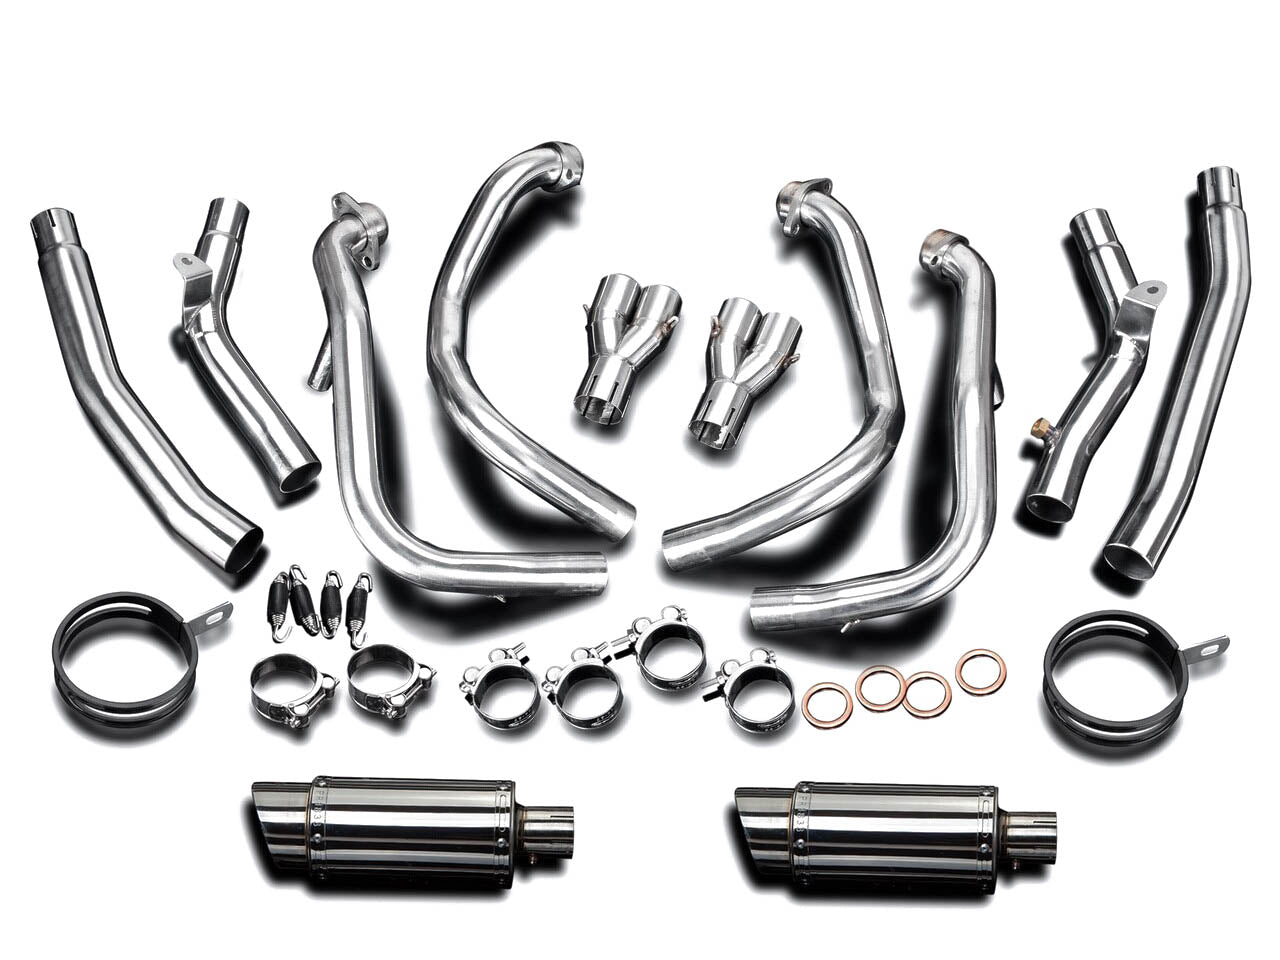 DELKEVIC Suzuki GSXR1300 Hayabusa (08/20) Full De-Cat 4-2 Exhaust System with Mini 8" Silencers